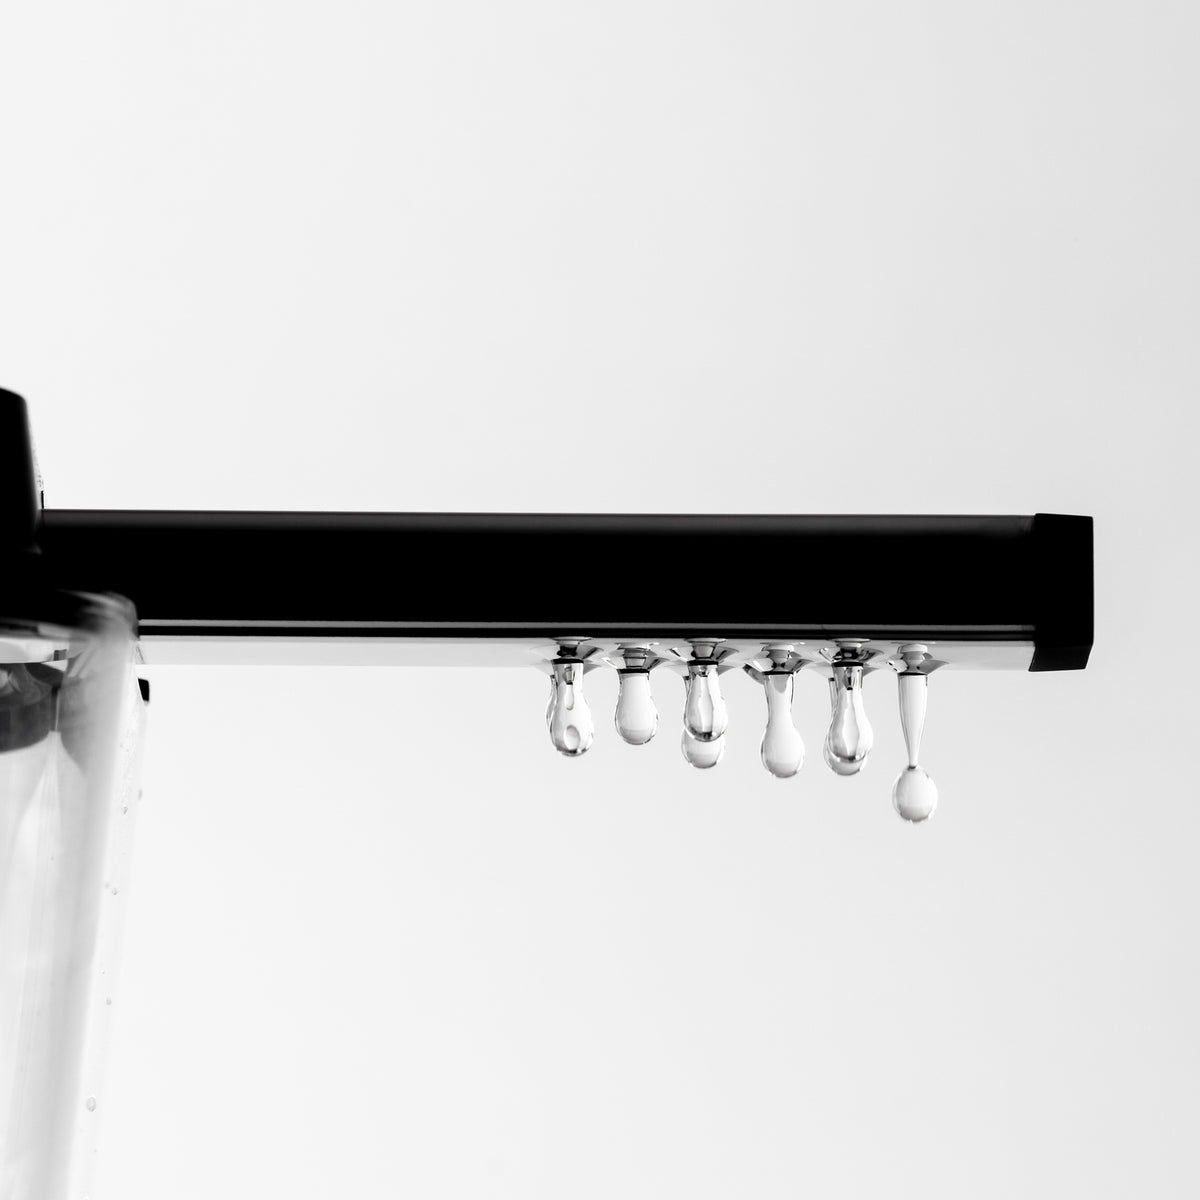 A close up of water dripping from the holes of a 9-hole outlet arm.